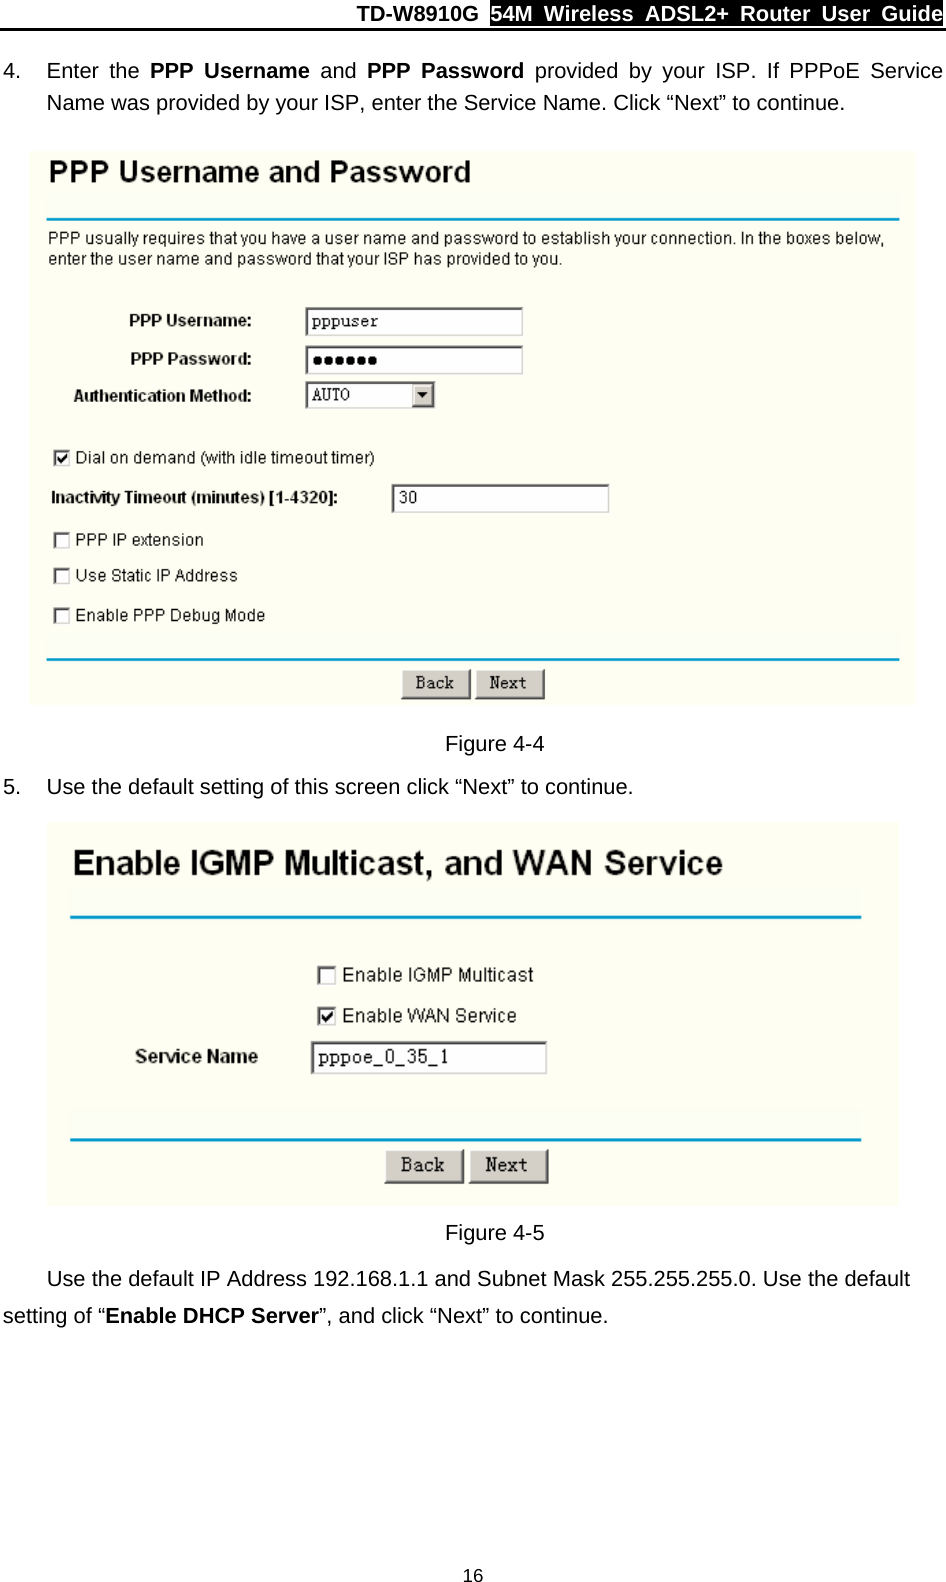 TD-W8910G  54M Wireless ADSL2+ Router User Guide  164. Enter the PPP Username and PPP Password provided by your ISP. If PPPoE Service Name was provided by your ISP, enter the Service Name. Click “Next” to continue.  Figure 4-4 5.  Use the default setting of this screen click “Next” to continue.  Figure 4-5 Use the default IP Address 192.168.1.1 and Subnet Mask 255.255.255.0. Use the default setting of “Enable DHCP Server”, and click “Next” to continue. 